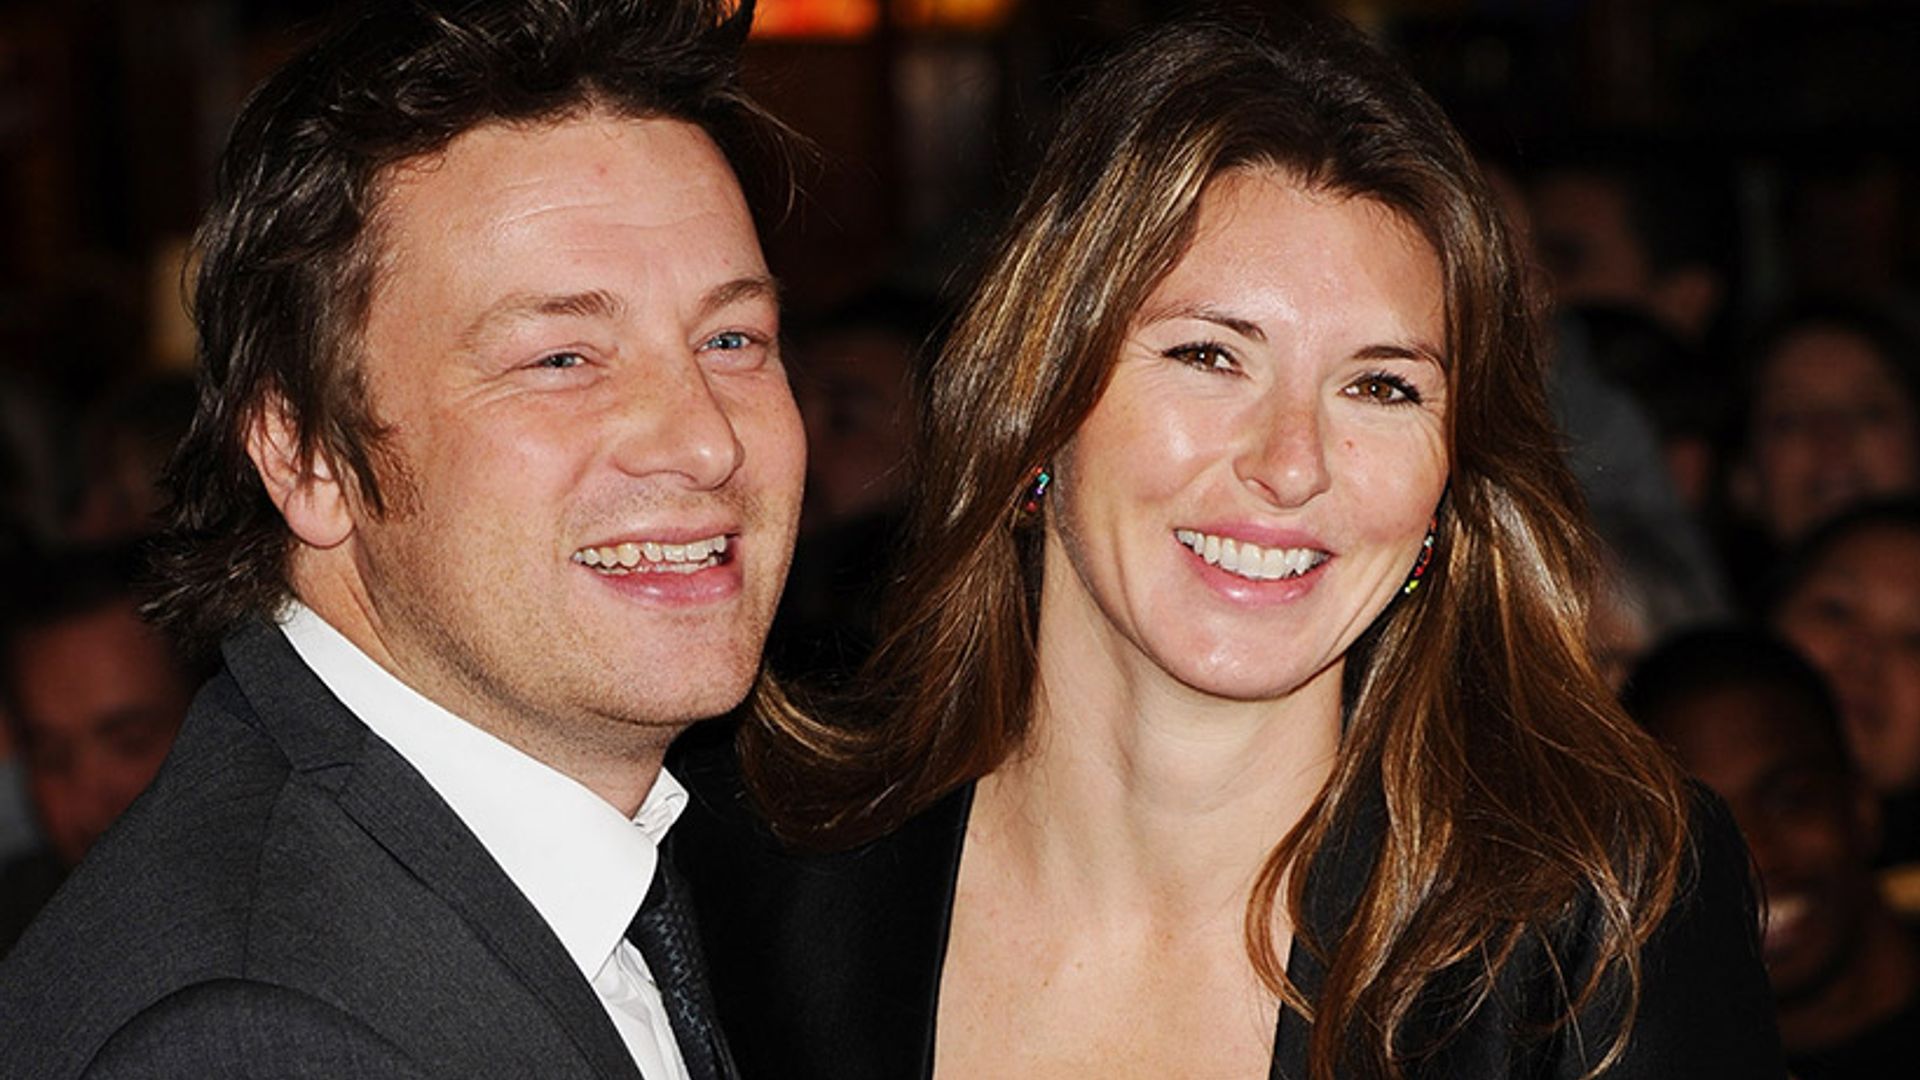 Jools Oliver shares seriously cute photo of baby River – see the snap